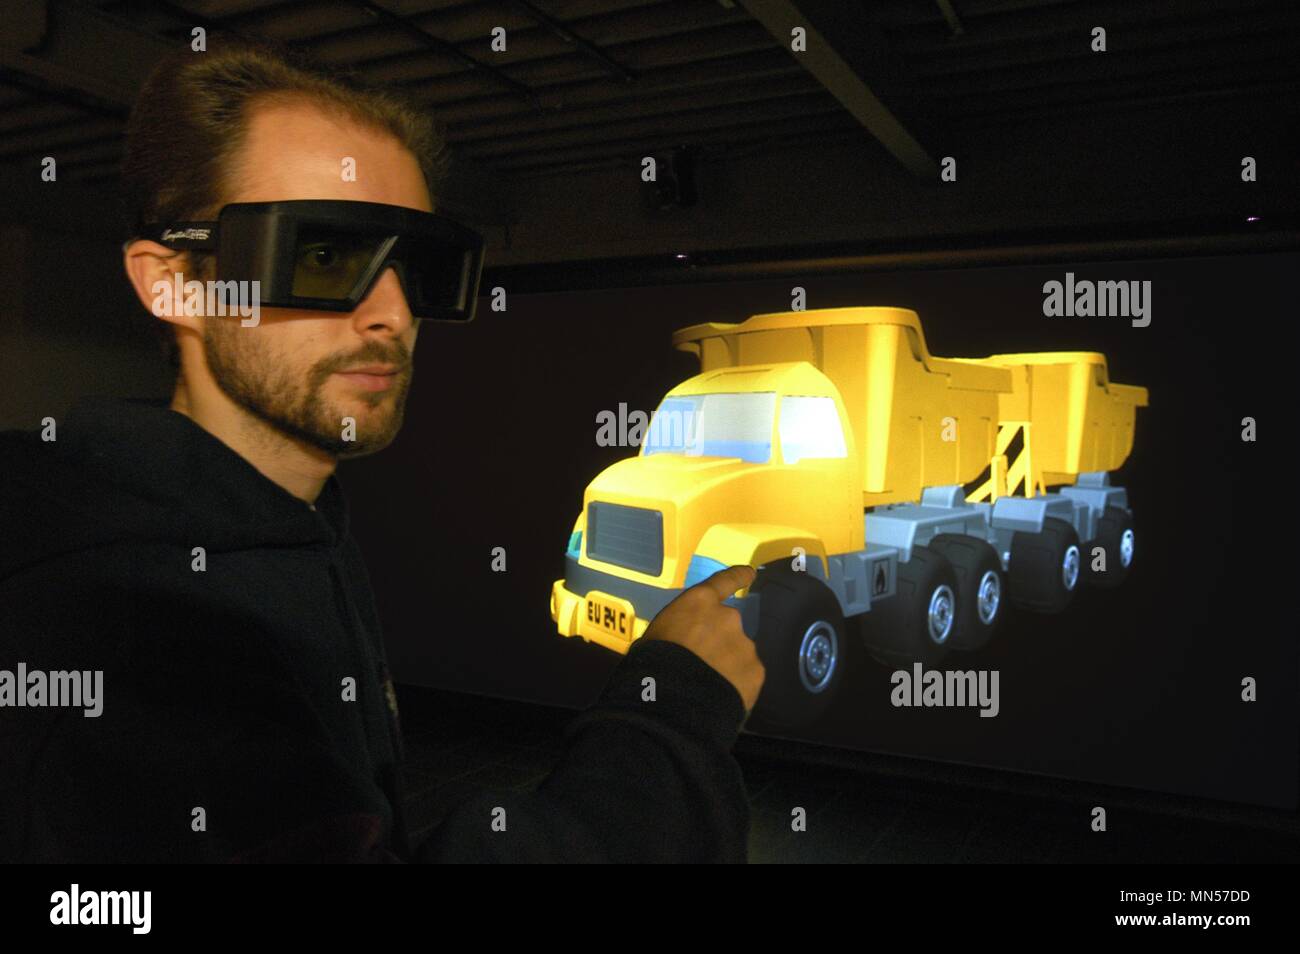 University of Milan - Bovisa (Italy), department of Design, laboratory of Virtual Models, three-dimensional projection of a truck Stock Photo